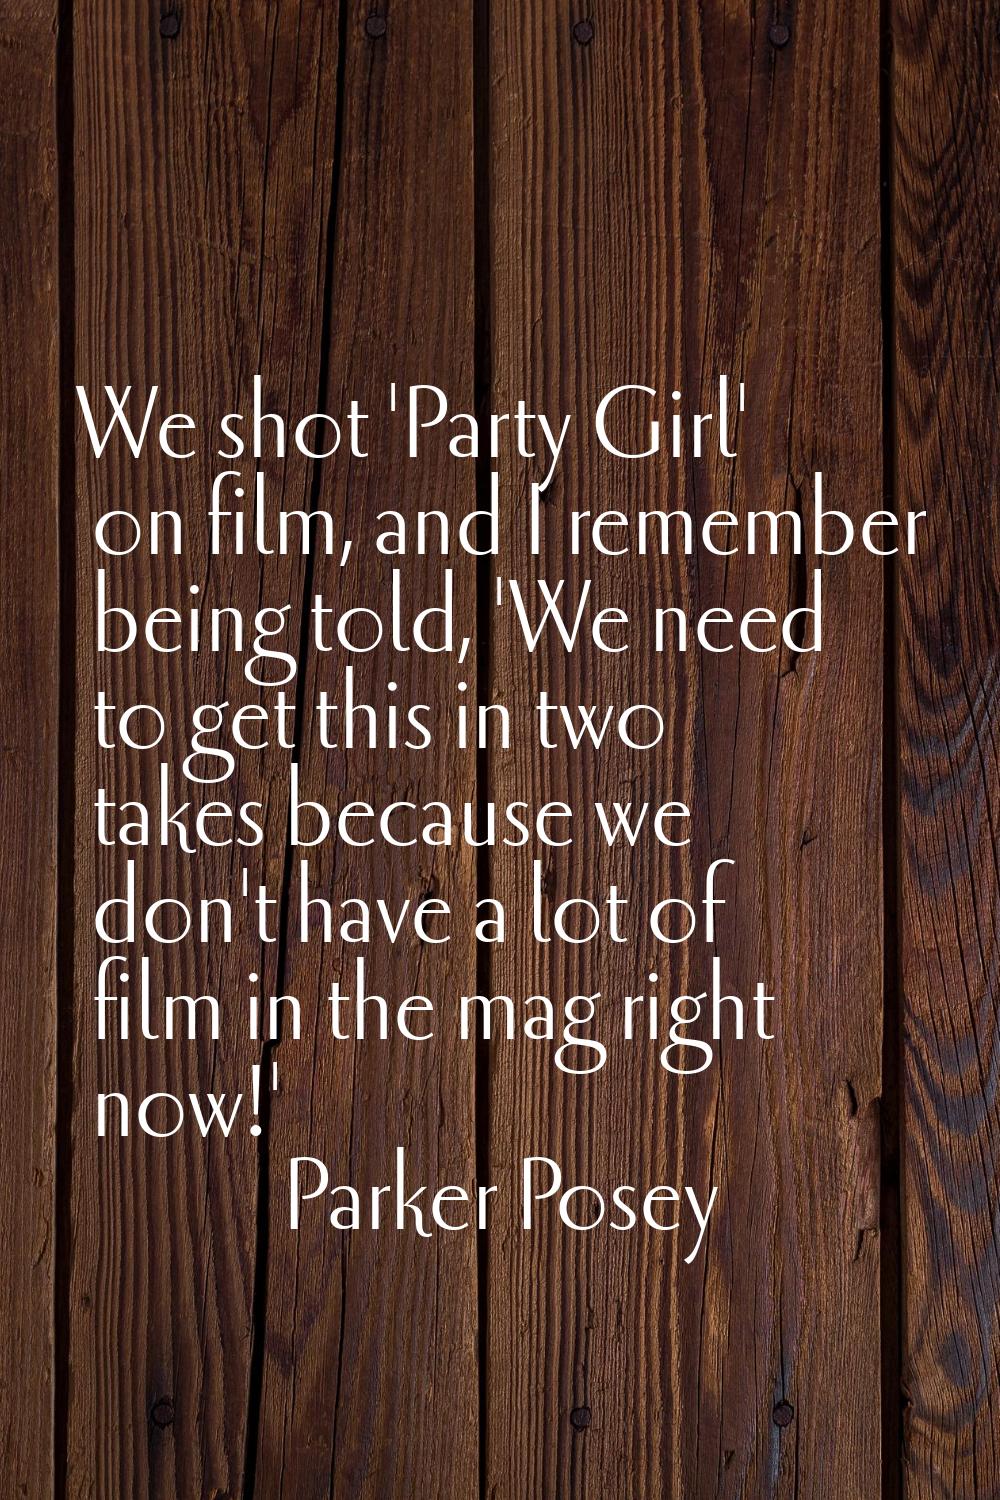 We shot 'Party Girl' on film, and I remember being told, 'We need to get this in two takes because 